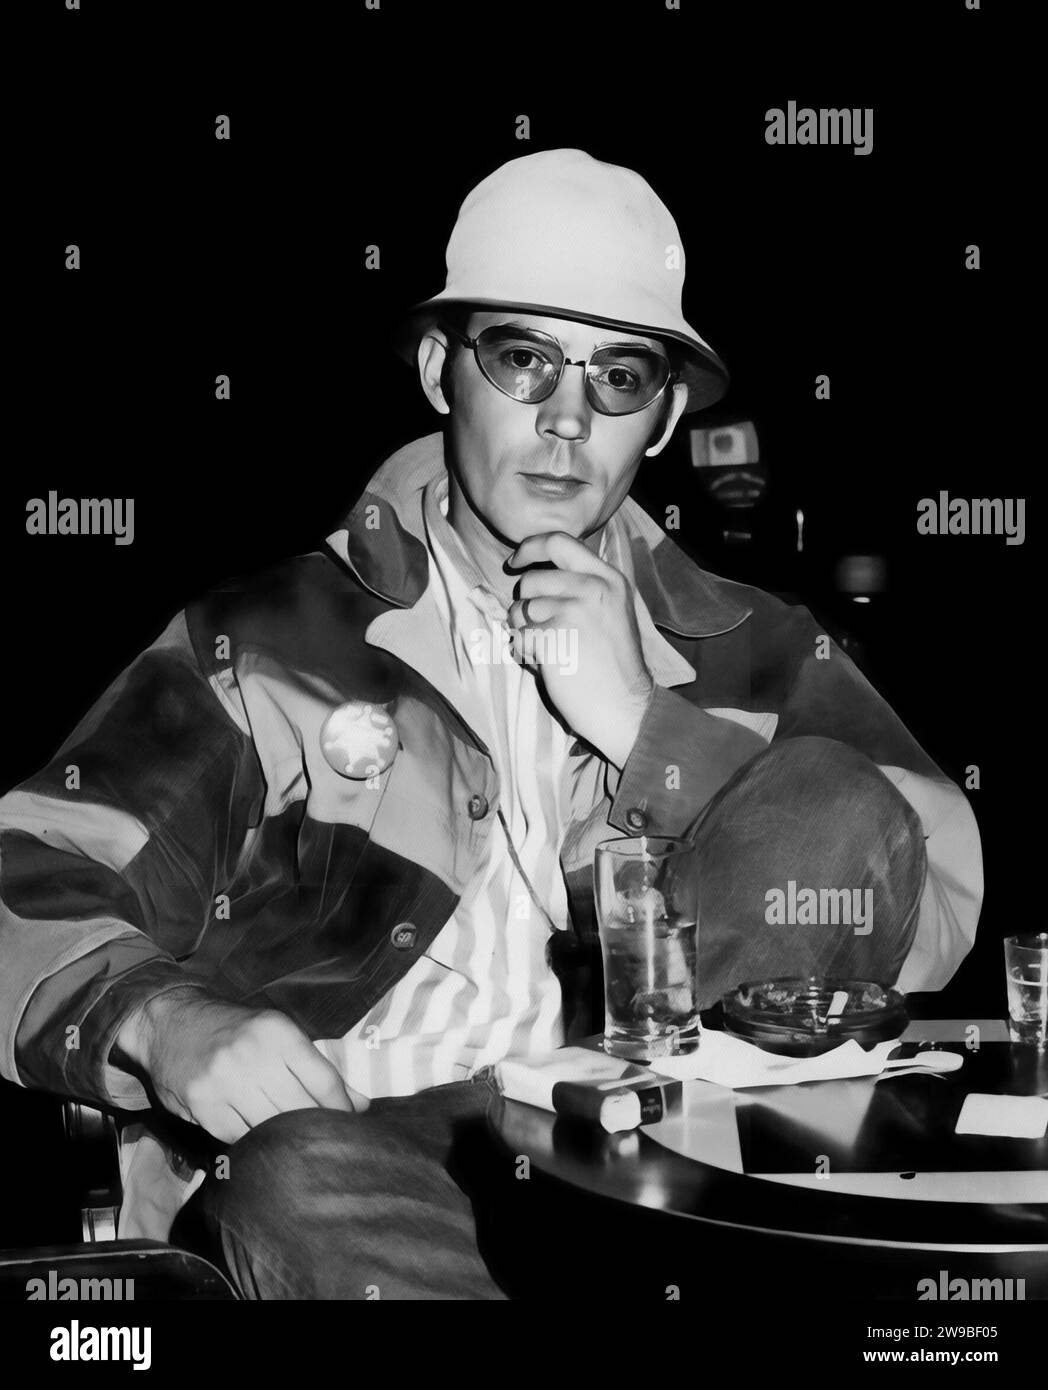 Hunter S Thompson. Portrait of the American journalist and author, Hunter Stockton Thompson (1937-2005), in 1971 Stock Photo